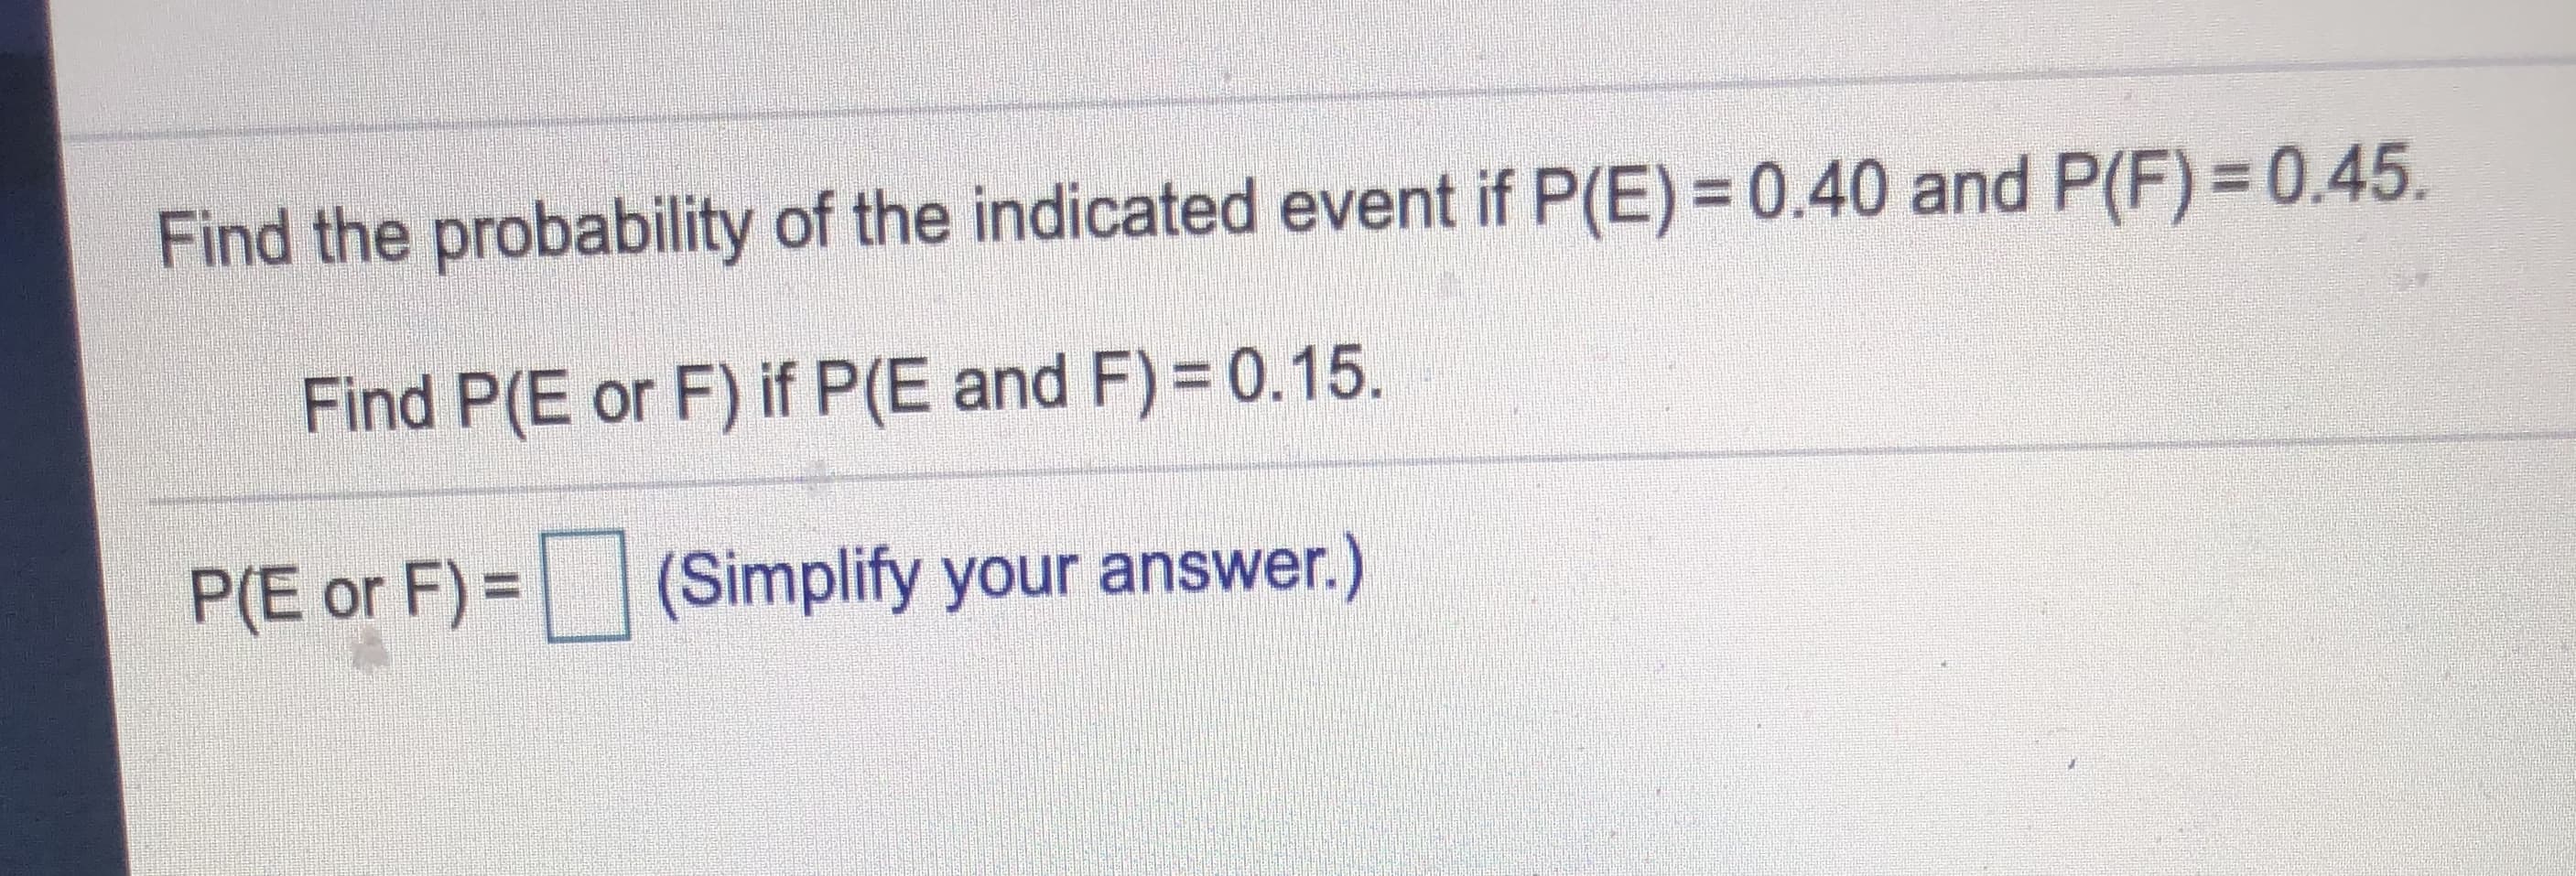 Find the probability of the indicated event if P(E) = 0.40 and P(F)= 0.45
Find P(E or F) if P(E and F) = 0.15.
P(E or F) =(Simplify your answer.)
